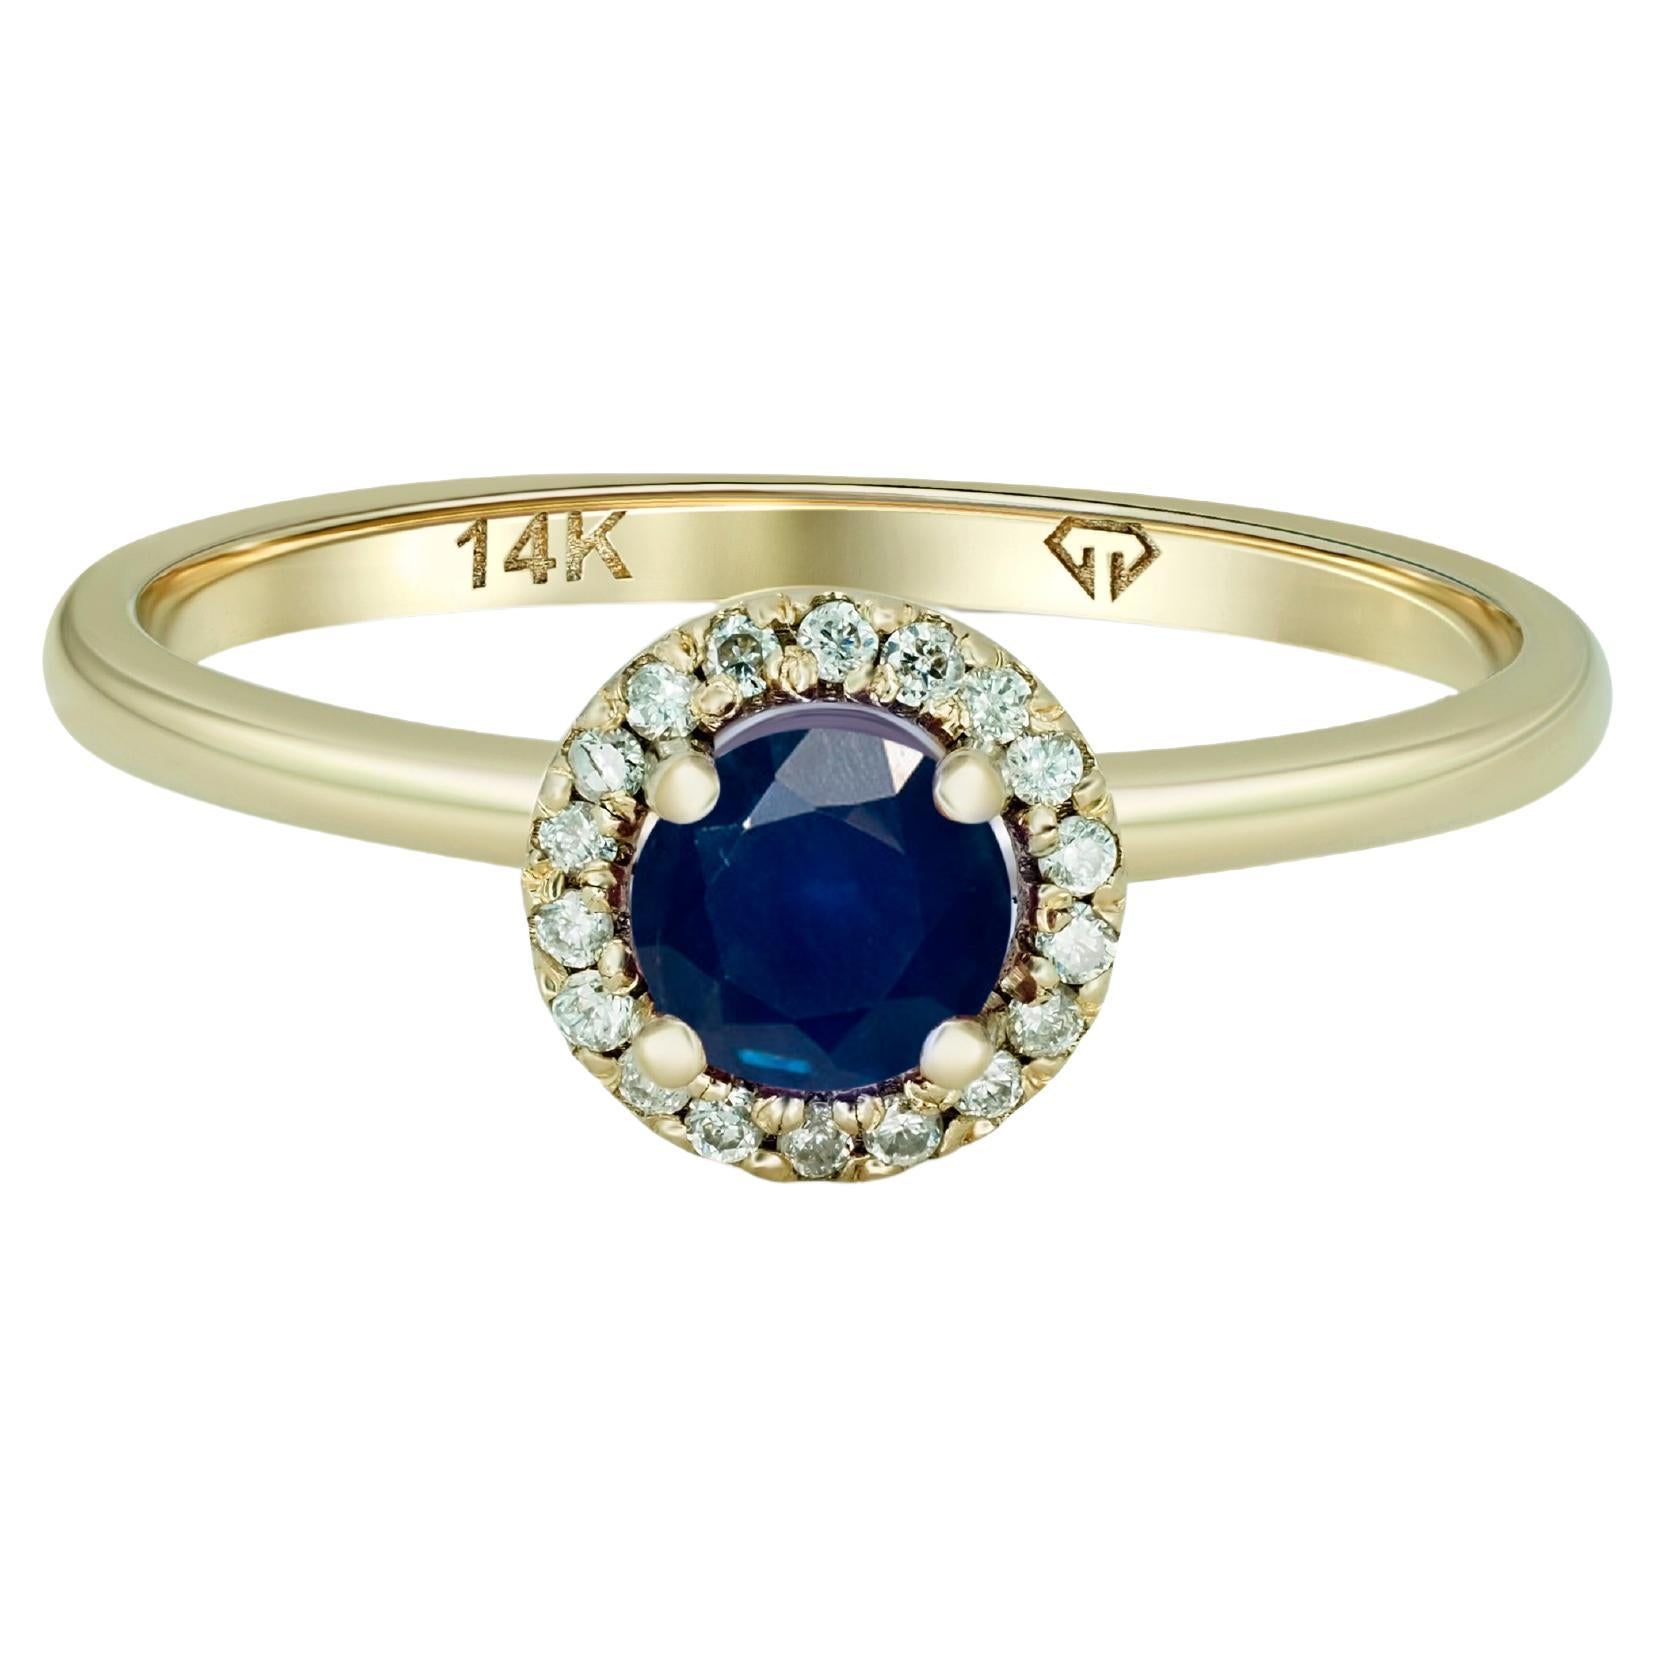 Halo Sapphire Ring with Diamonds in 14 Karat Gold.  For Sale